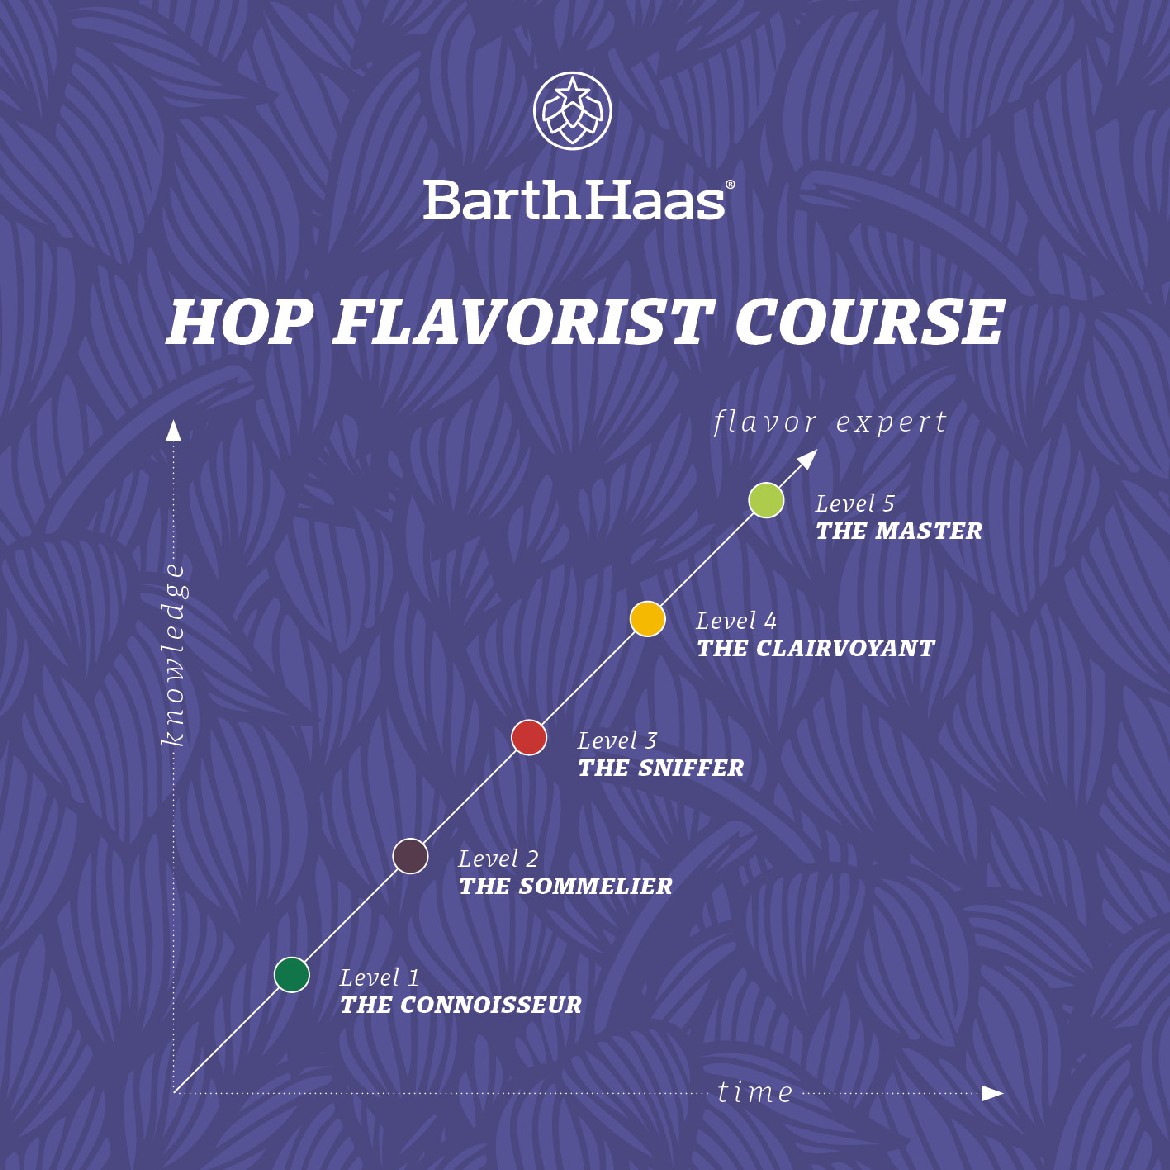 First Group Completes Hop Flavorist Master Course